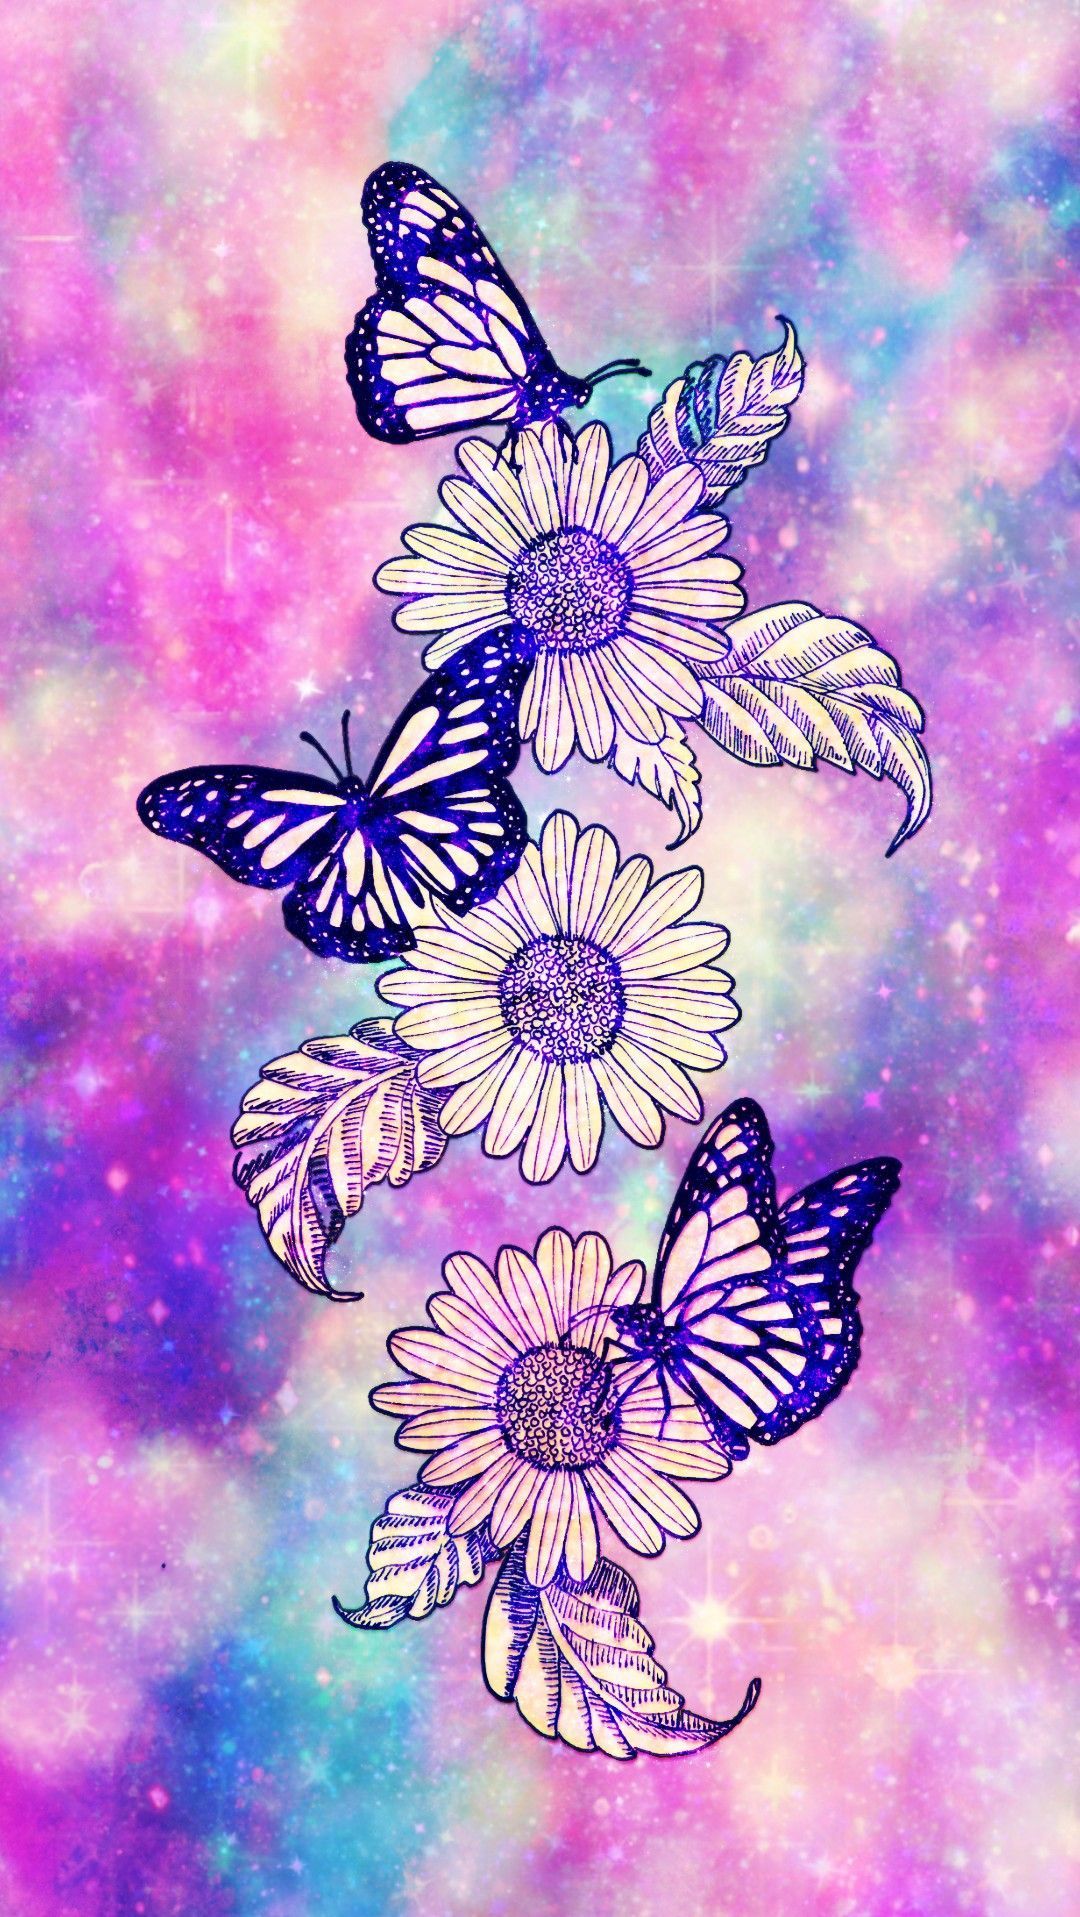 Galaxy Sunny Sunflowers, made by me #flowers #floral #background